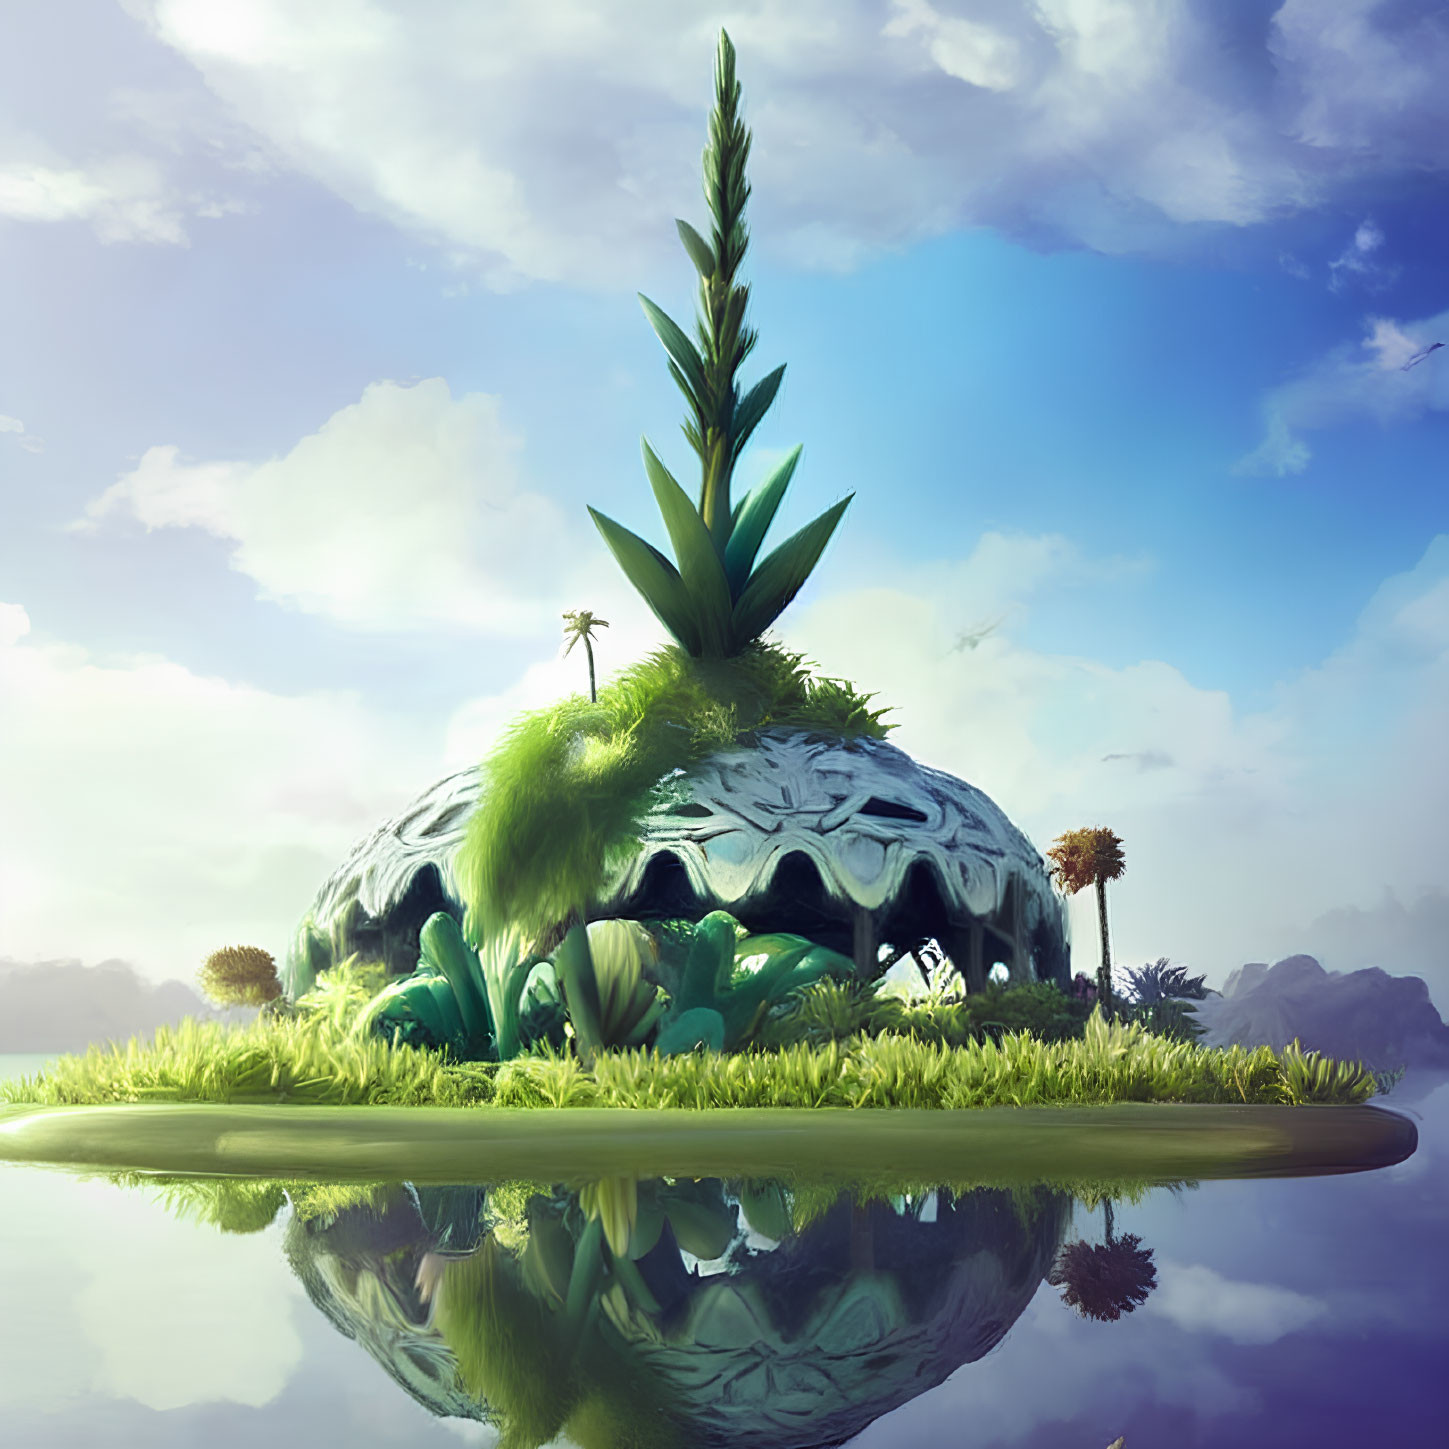 Tranquil illustration of overgrown pineapple on reflective water with mountains.